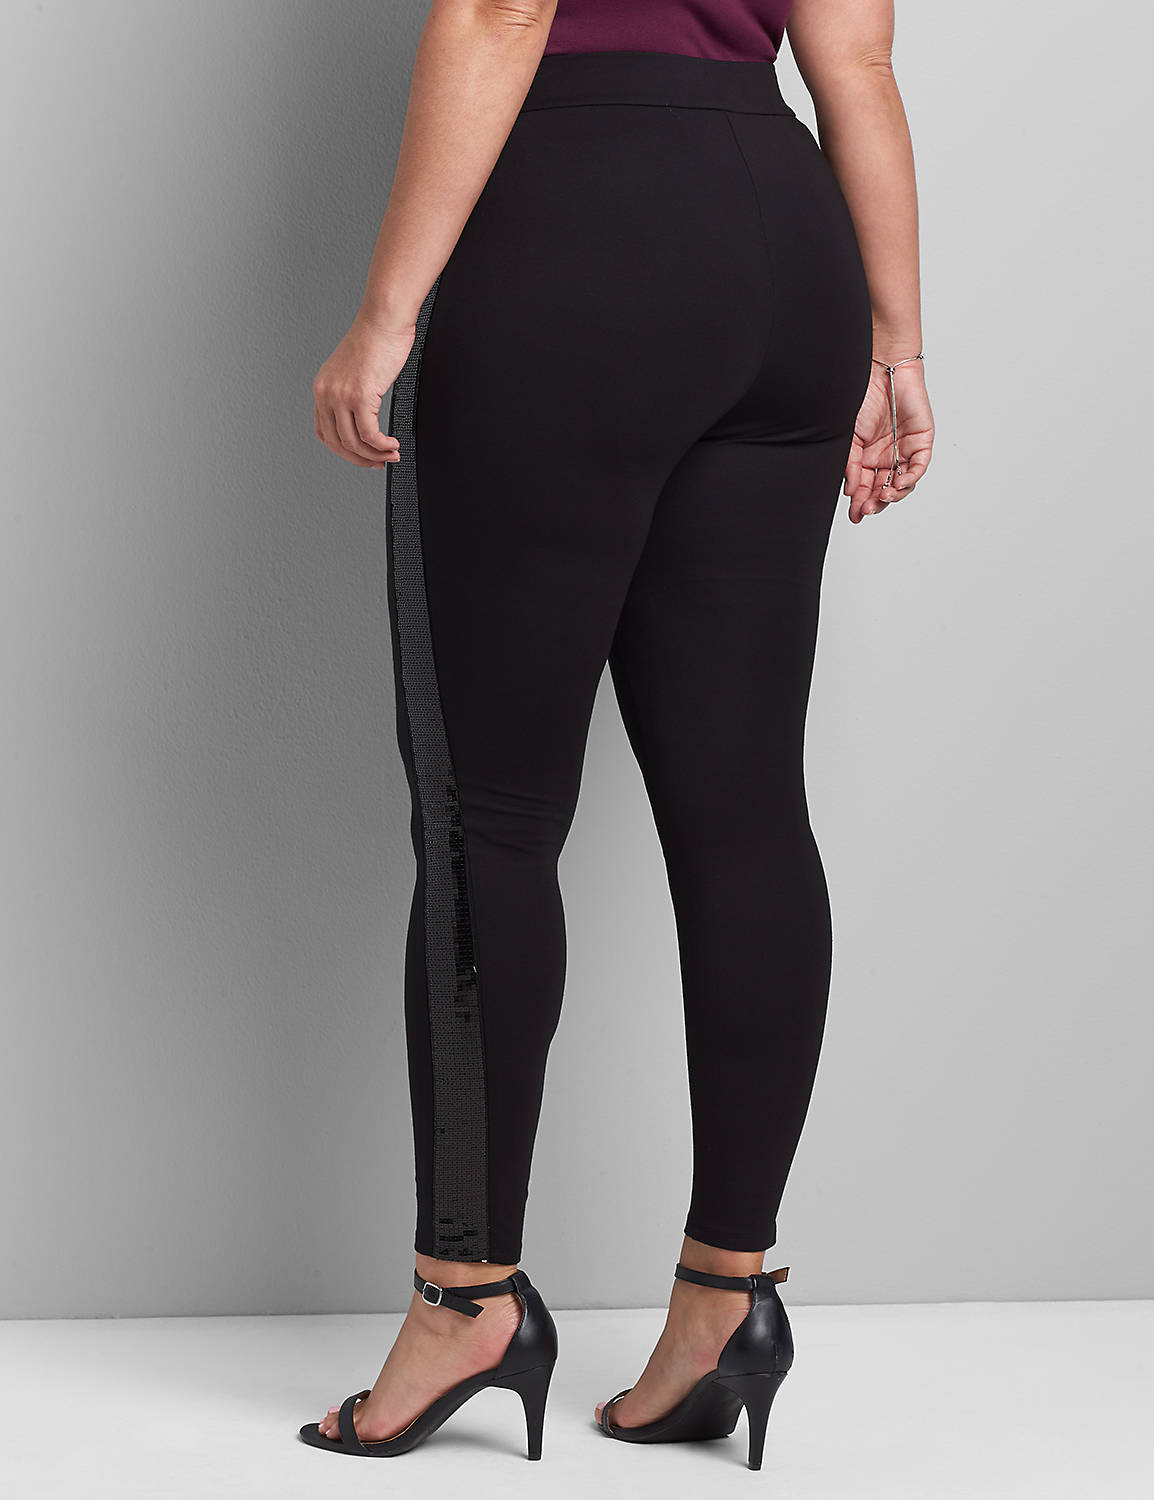 Ponte Legging with Sequin Side Tape 1117348:Pitch Black LB 1000322:18/20 Product Image 2